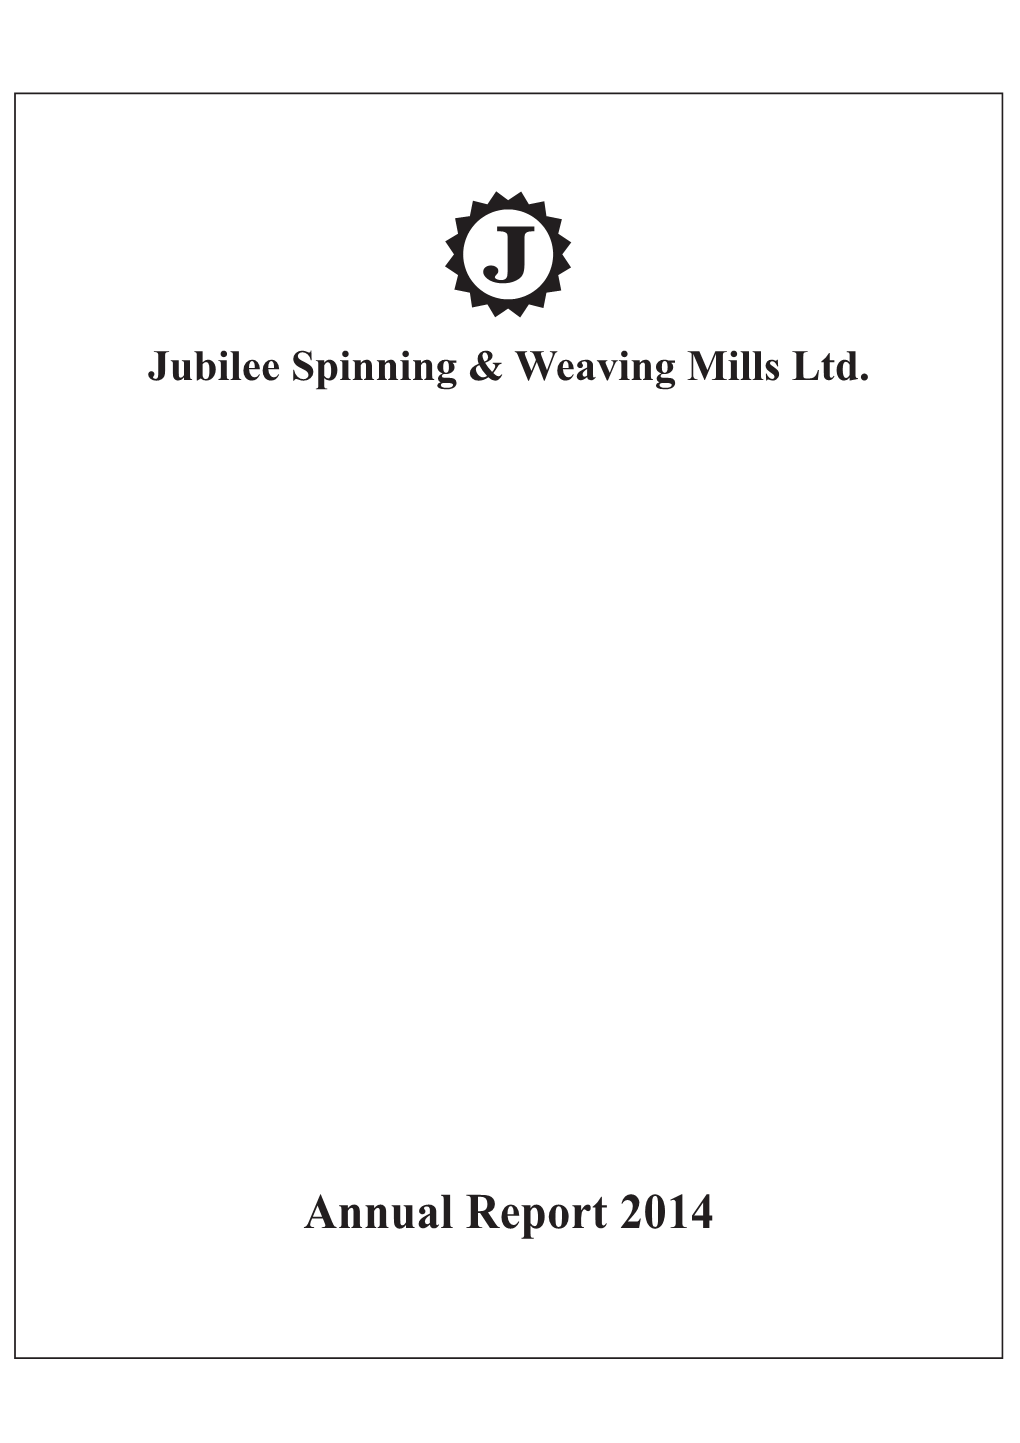 Annual Audited Financial Statements 2013-14